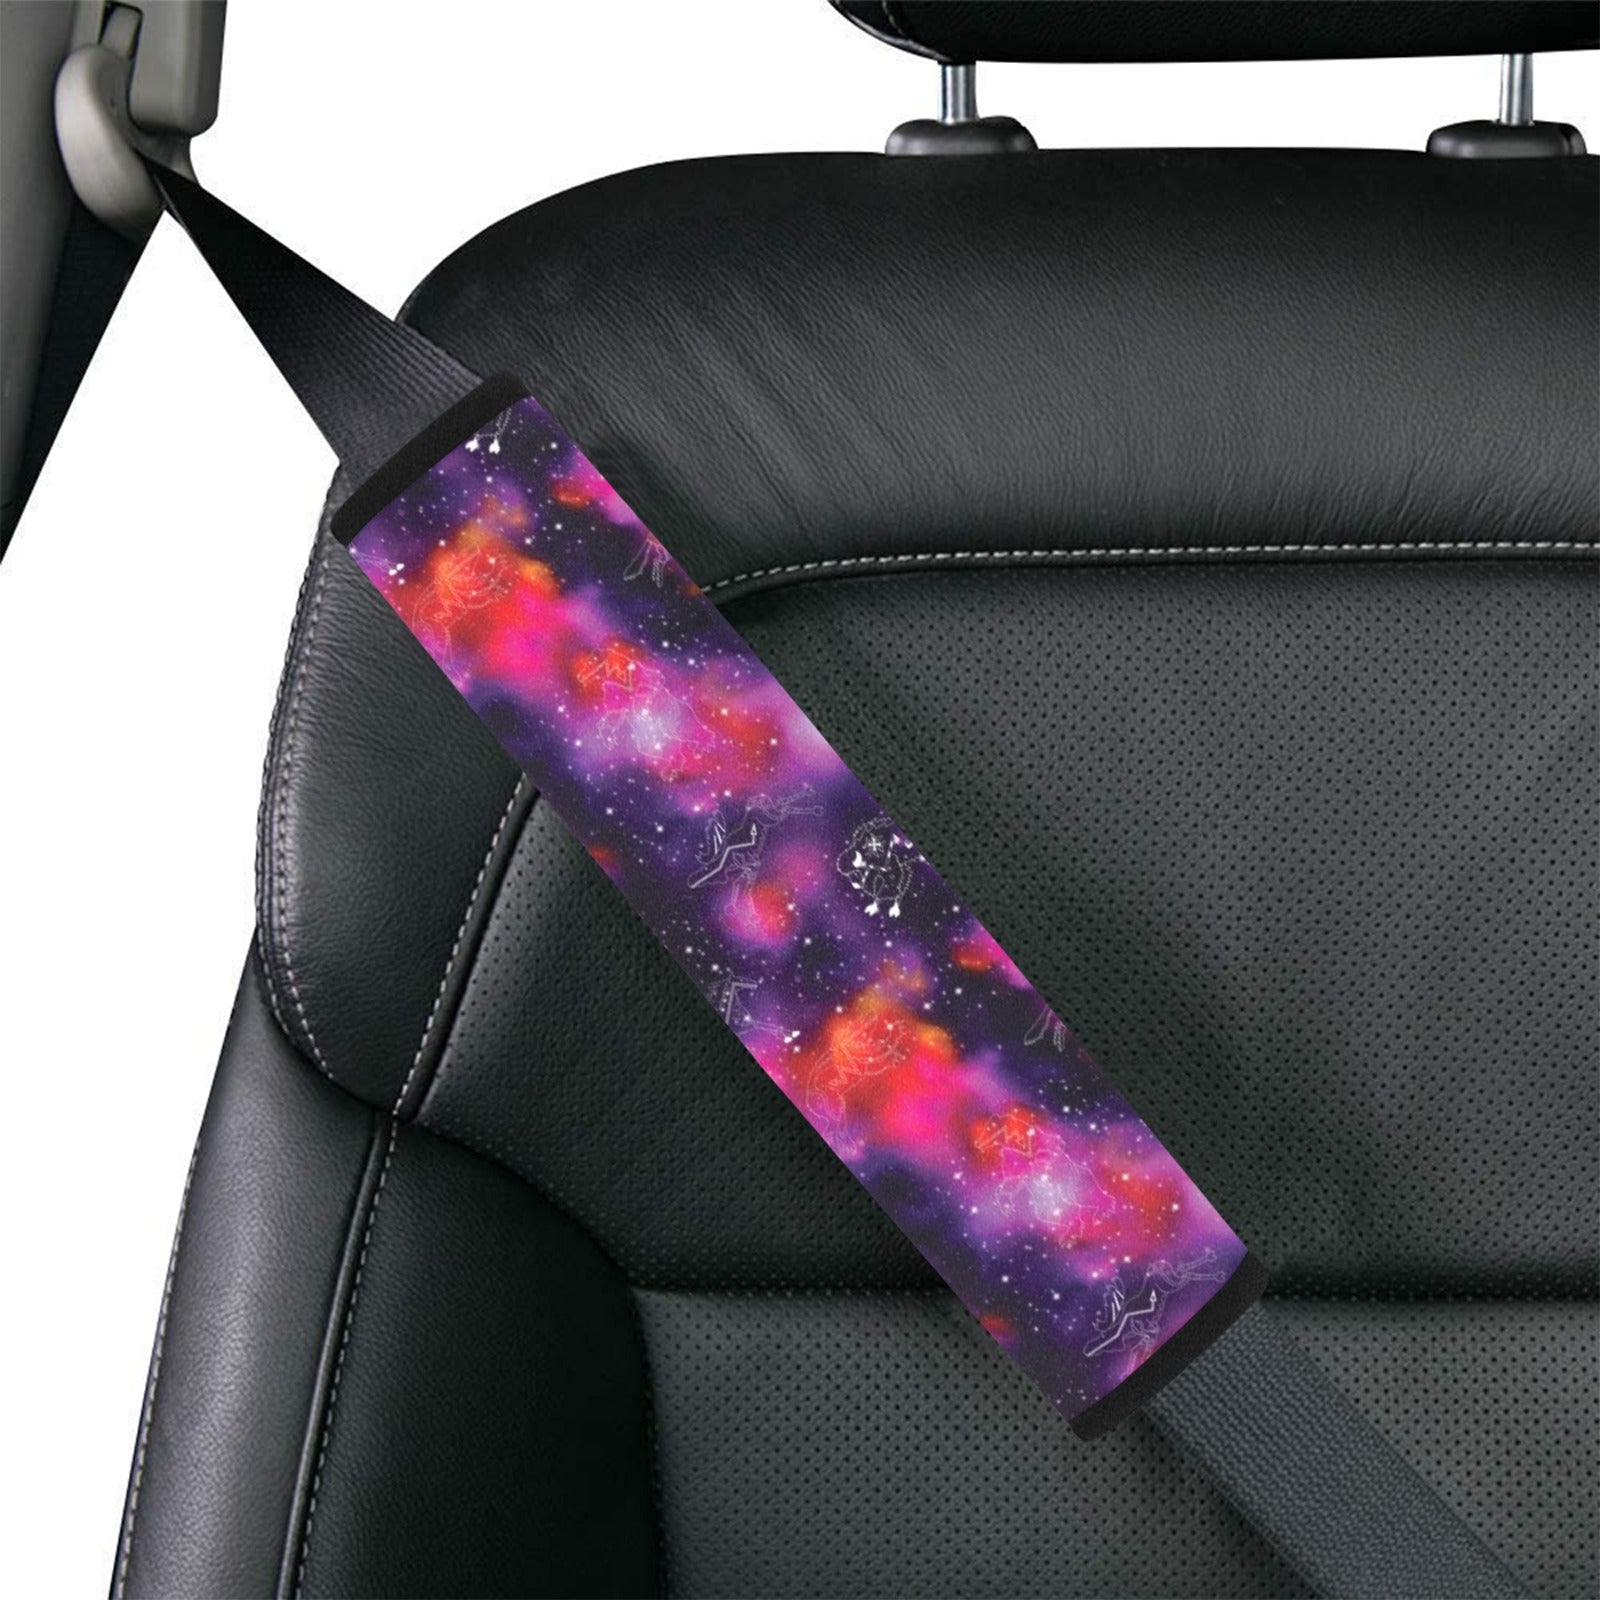 Animal Ancestors 9 Cosmic Swirl Purple and Red Car Seat Belt Cover 7''x12.6'' (Pack of 2)